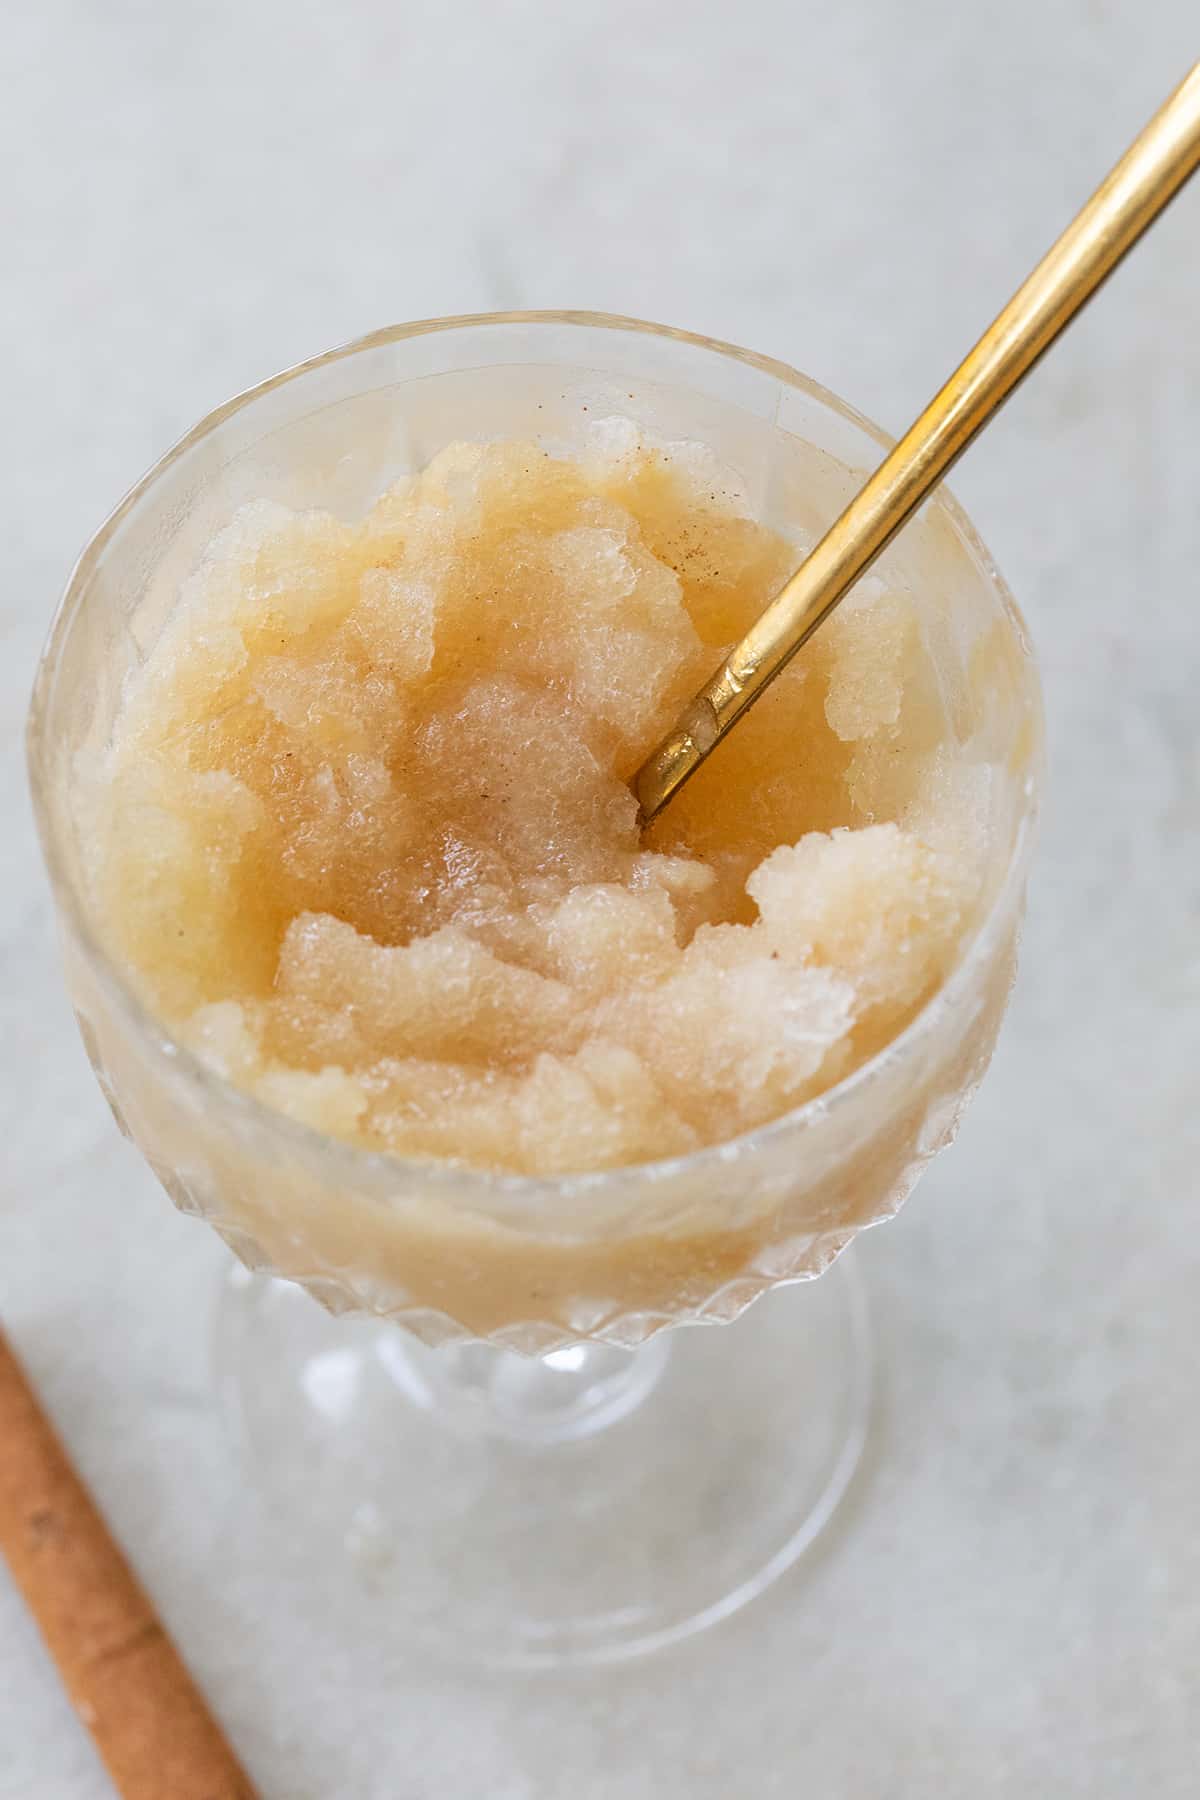 Frozen apple cider dessert in a glass with a gold spoon.